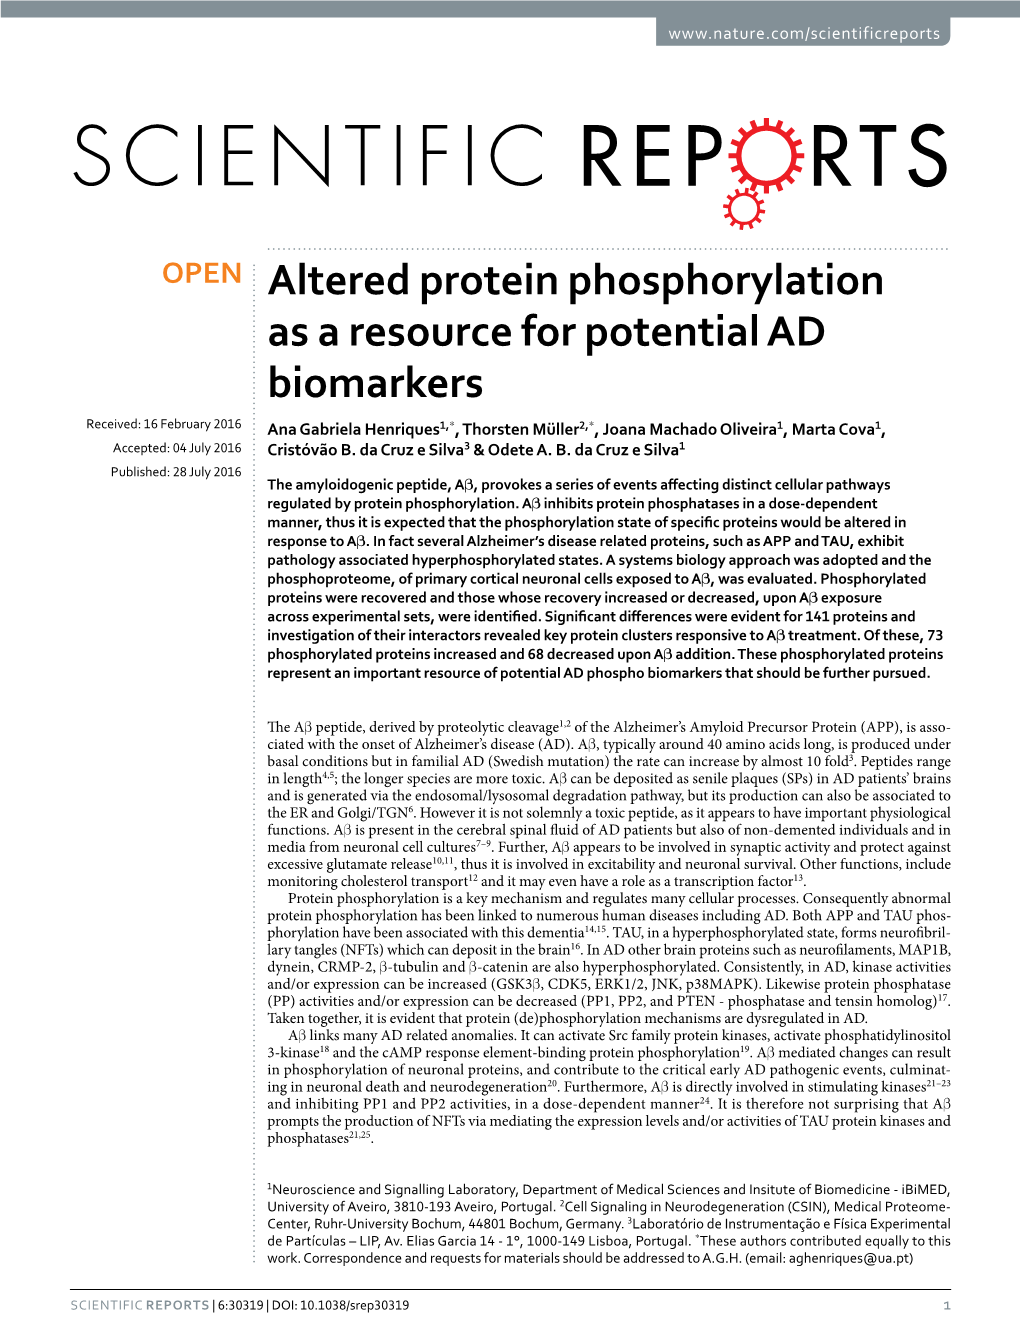 Altered Protein Phosphorylation As a Resource for Potential AD Biomarkers